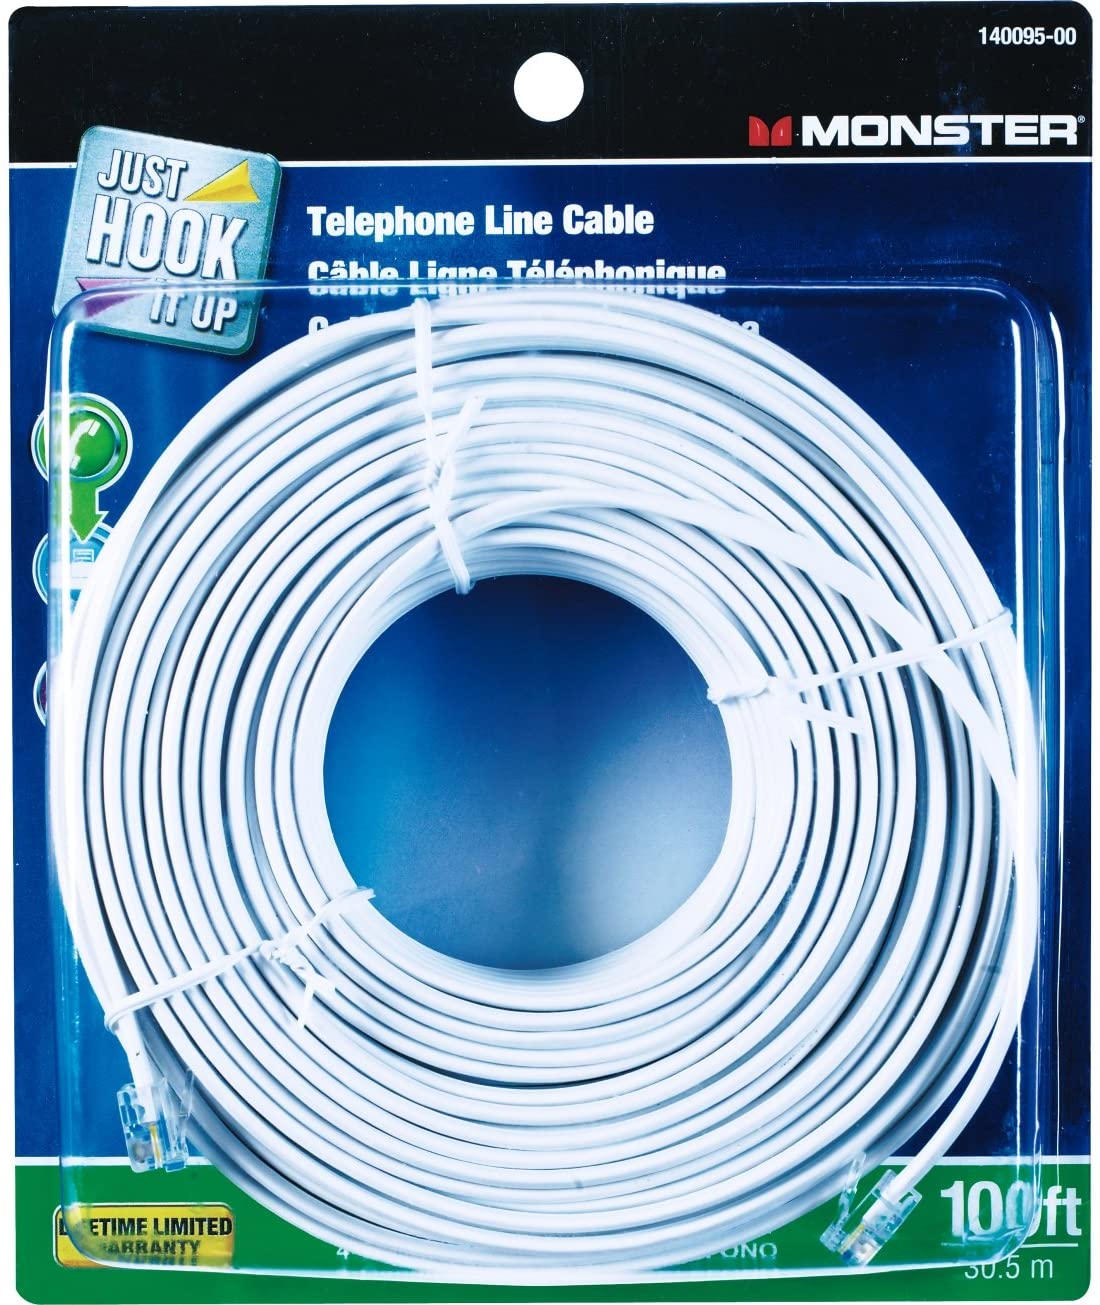 Monster Cable Telephone Line Cord Modular 4 Conductor 100 ' White Carded